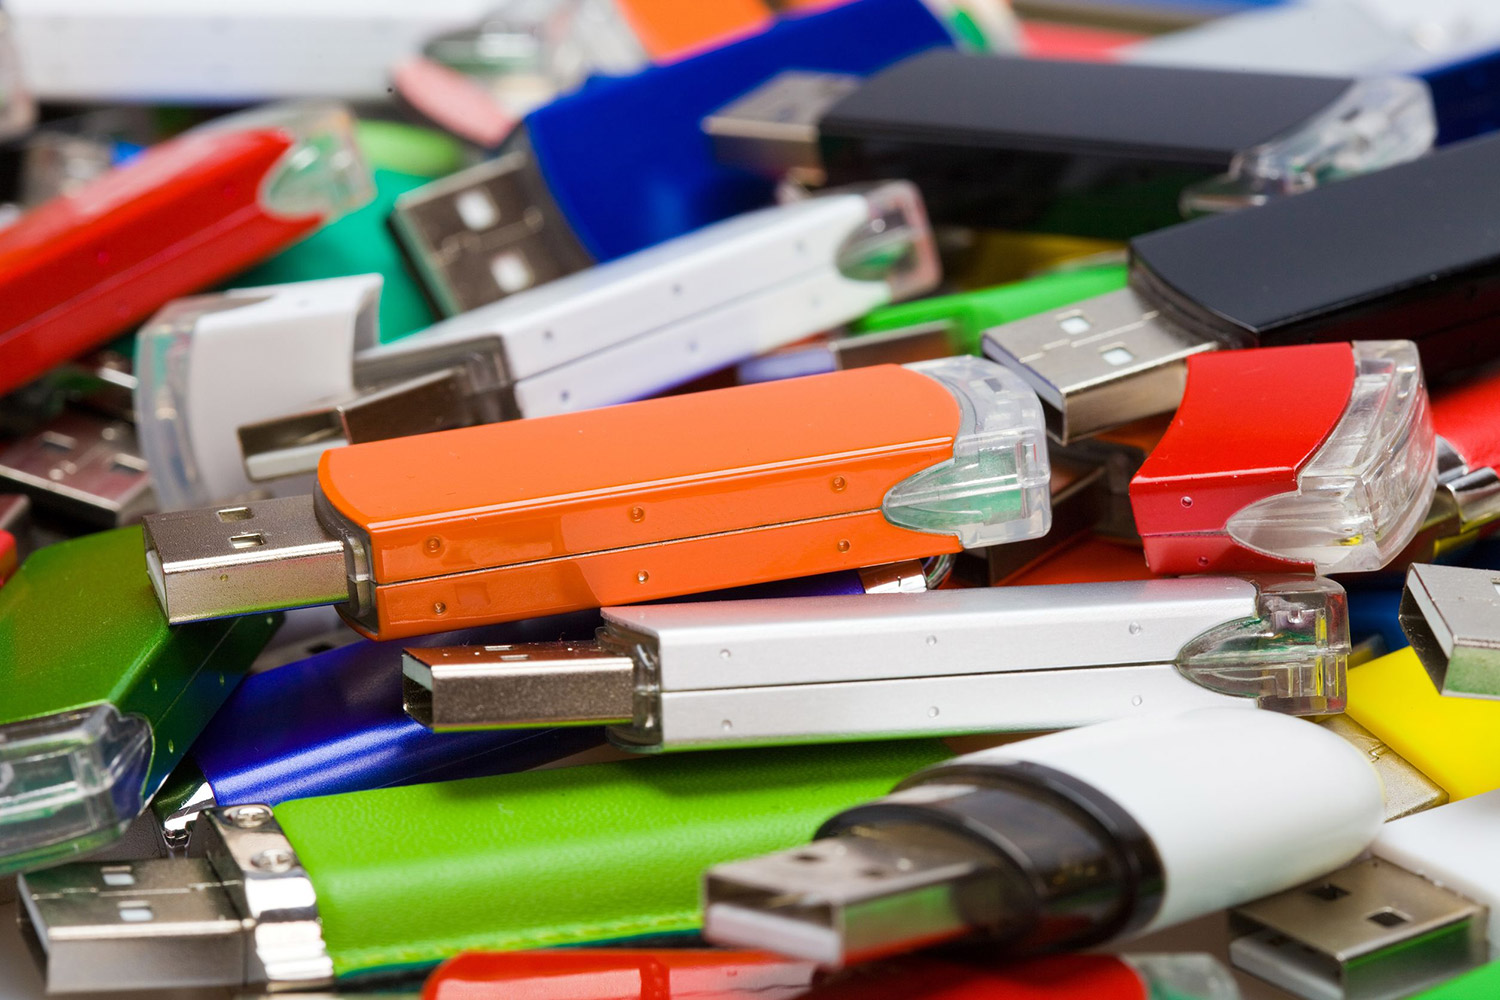 Flash Drives. Stock image from Google Images.